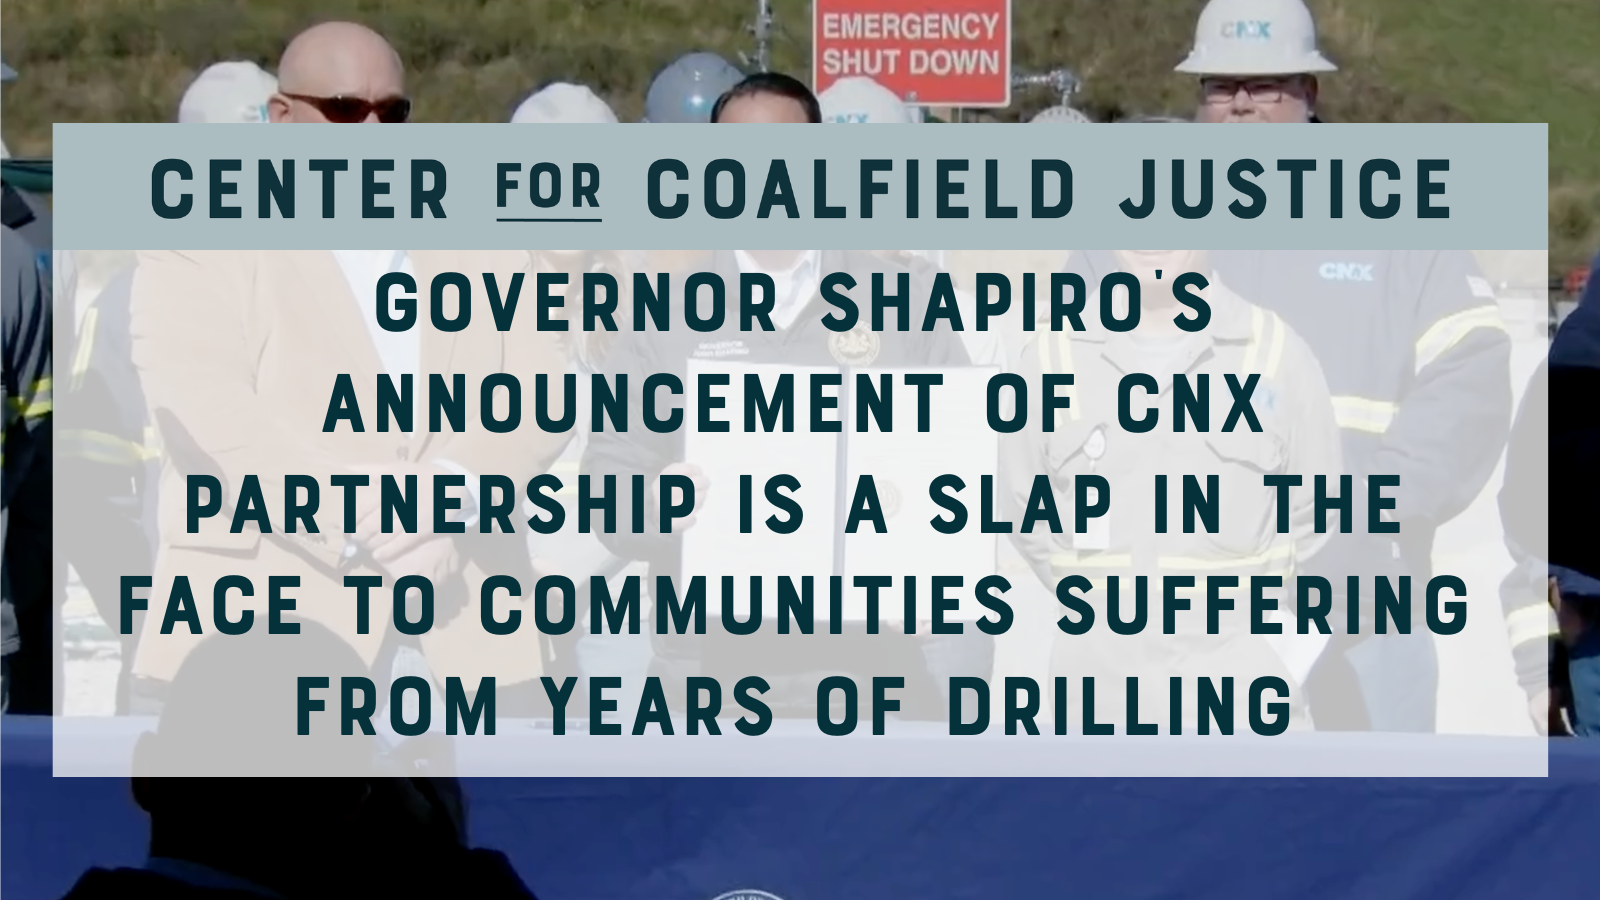 GOV SHAPIRO’S ANNOUNCEMENT OF CNX PARTNERSHIP IS A SLAP IN THE FACE TO COMMUNITIES SUFFERING FROM YEARS OF DRILLING (Twitter Post)